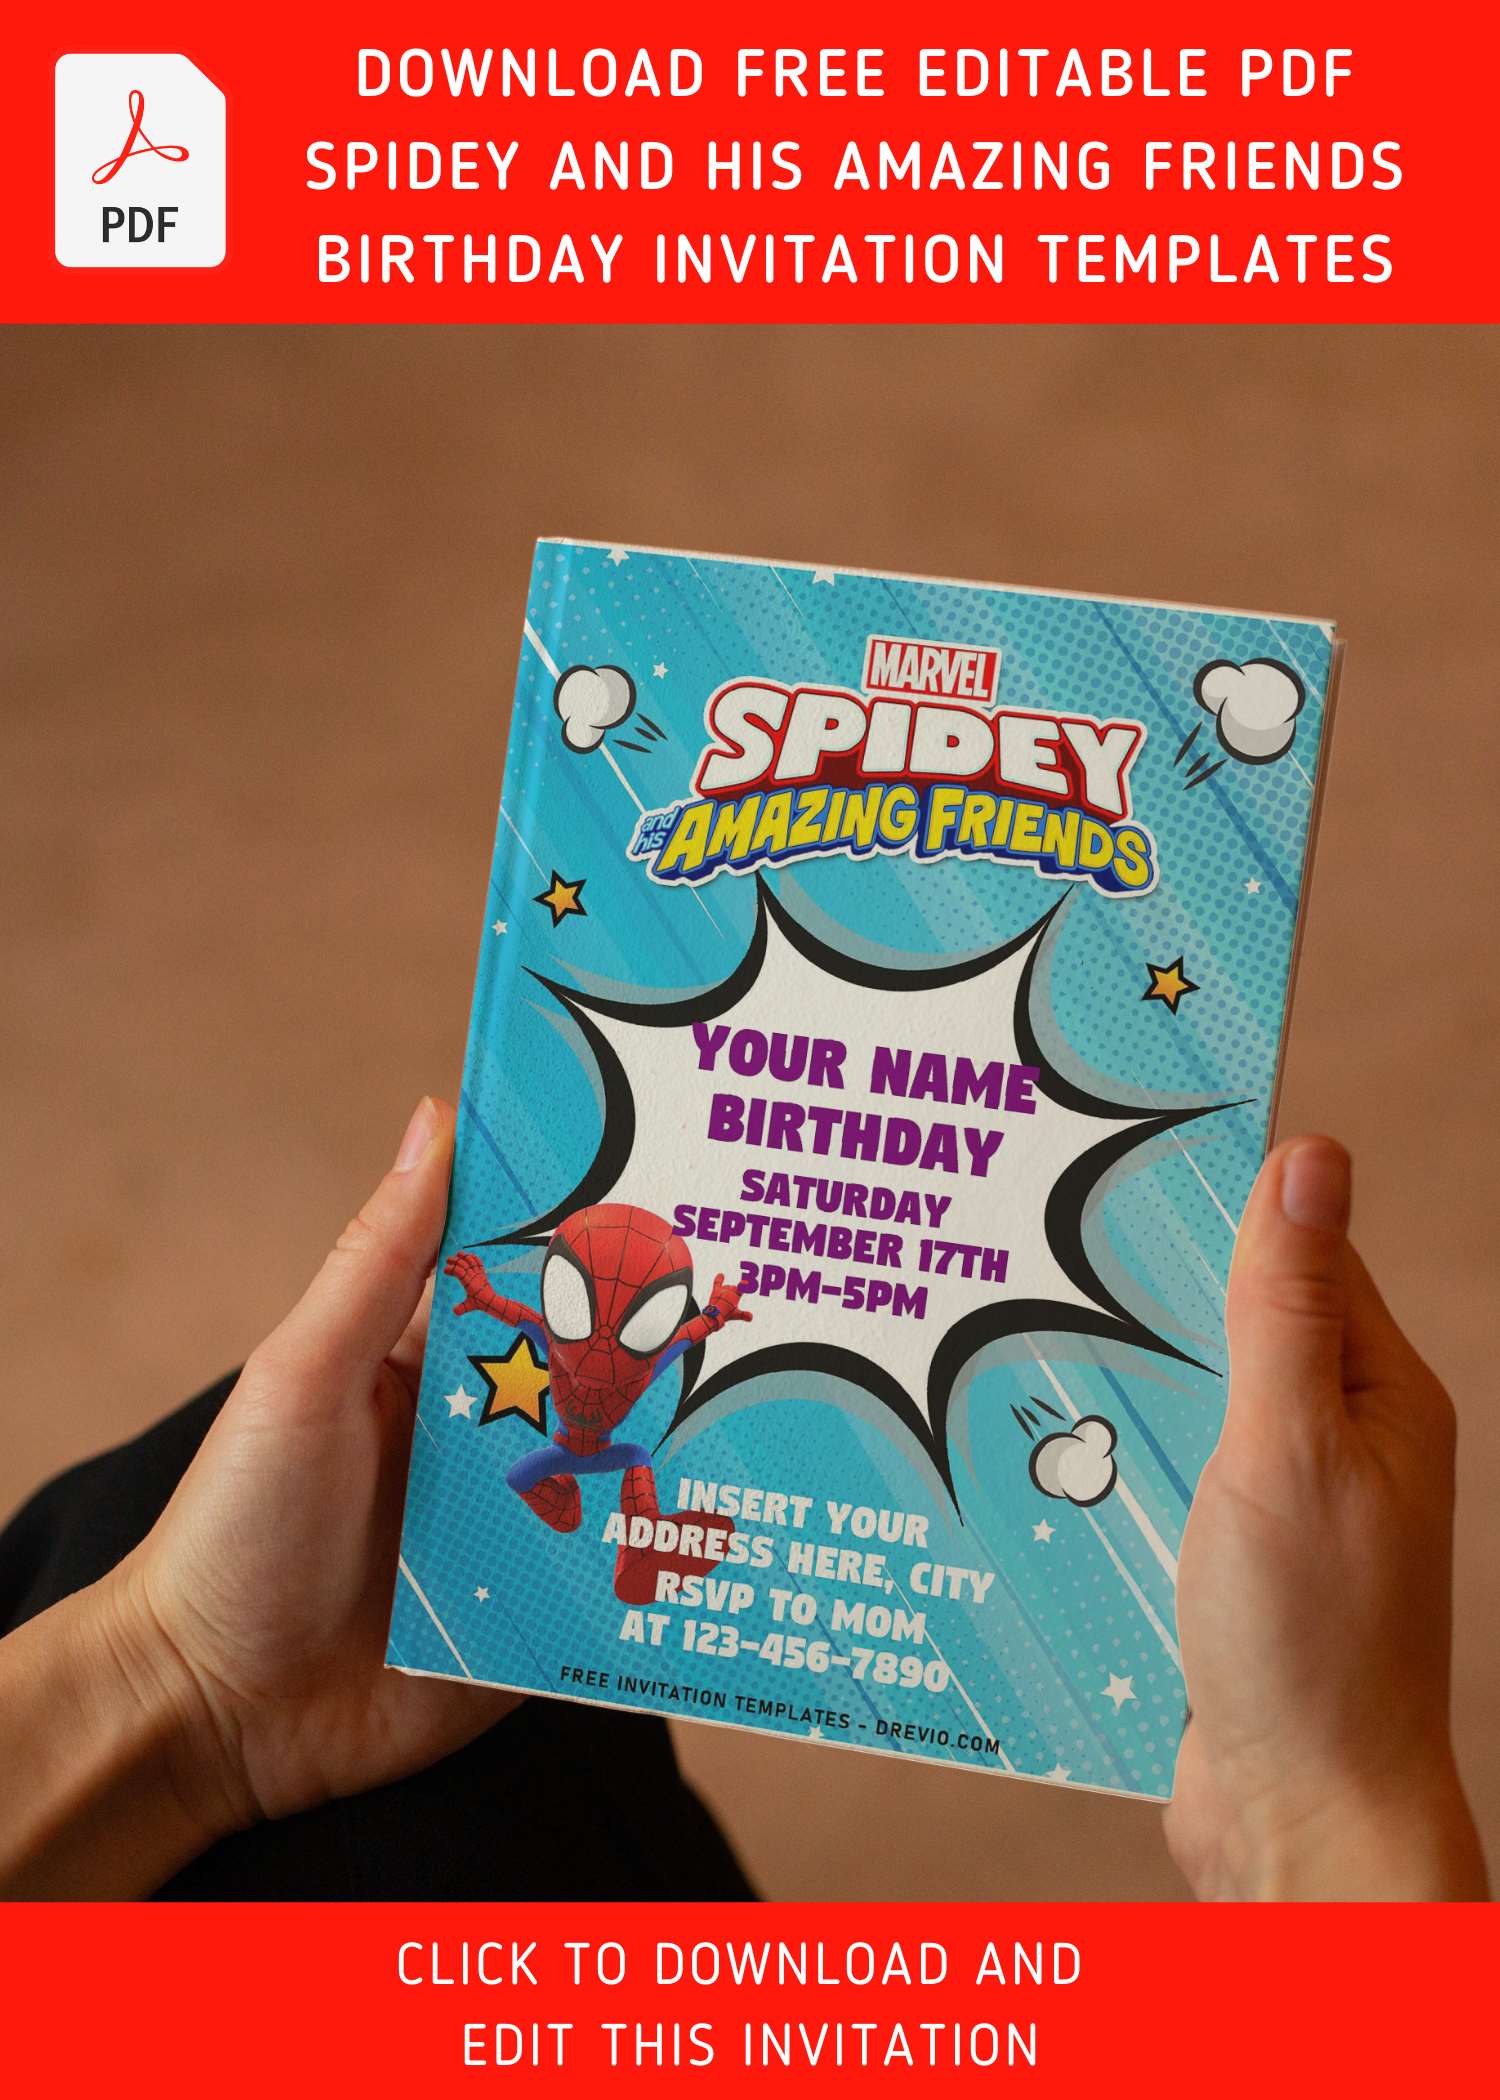 free-editable-pdf-epic-spidey-and-his-amazing-friends-birthday-invitation-templates-download